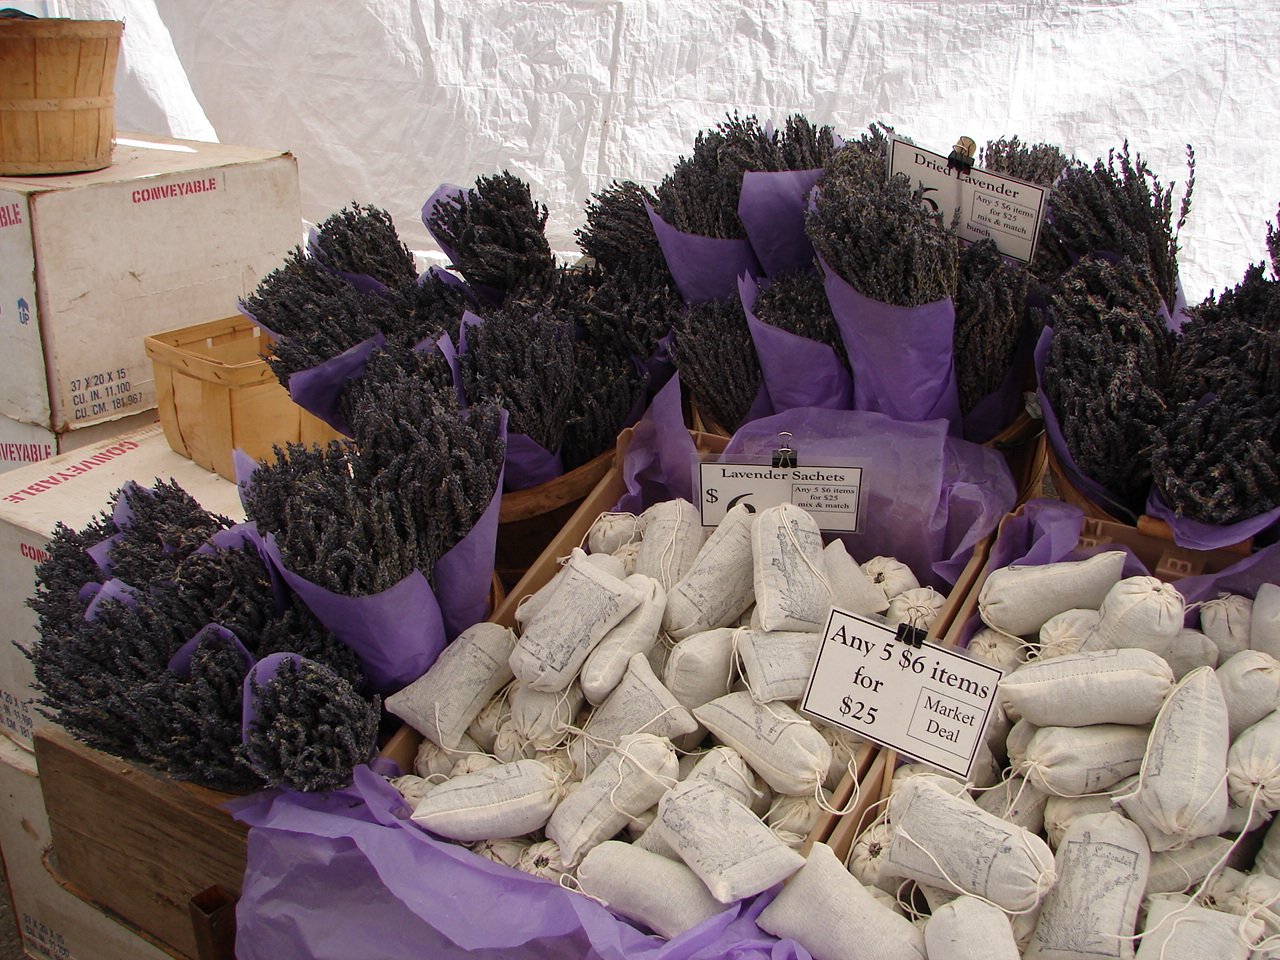 Lavender products for sale at the San Francisco Farmers Market | Photo: Aviad2001 